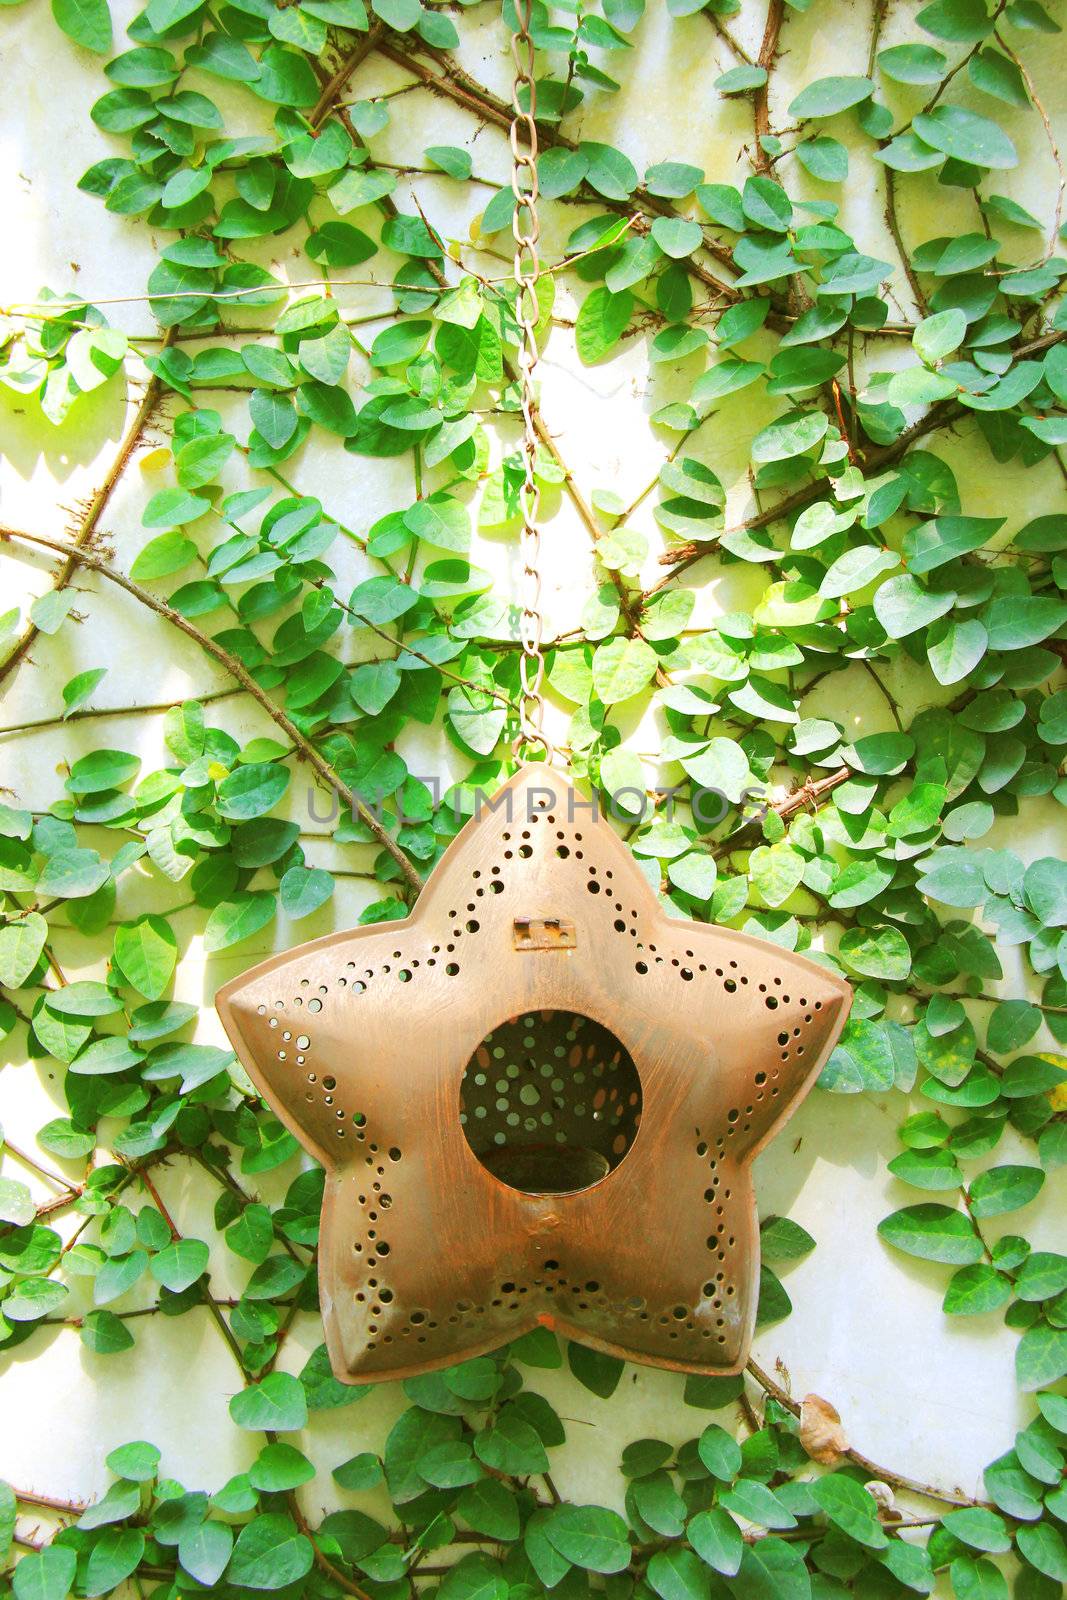 Old star hanging for decorated on ivy wall